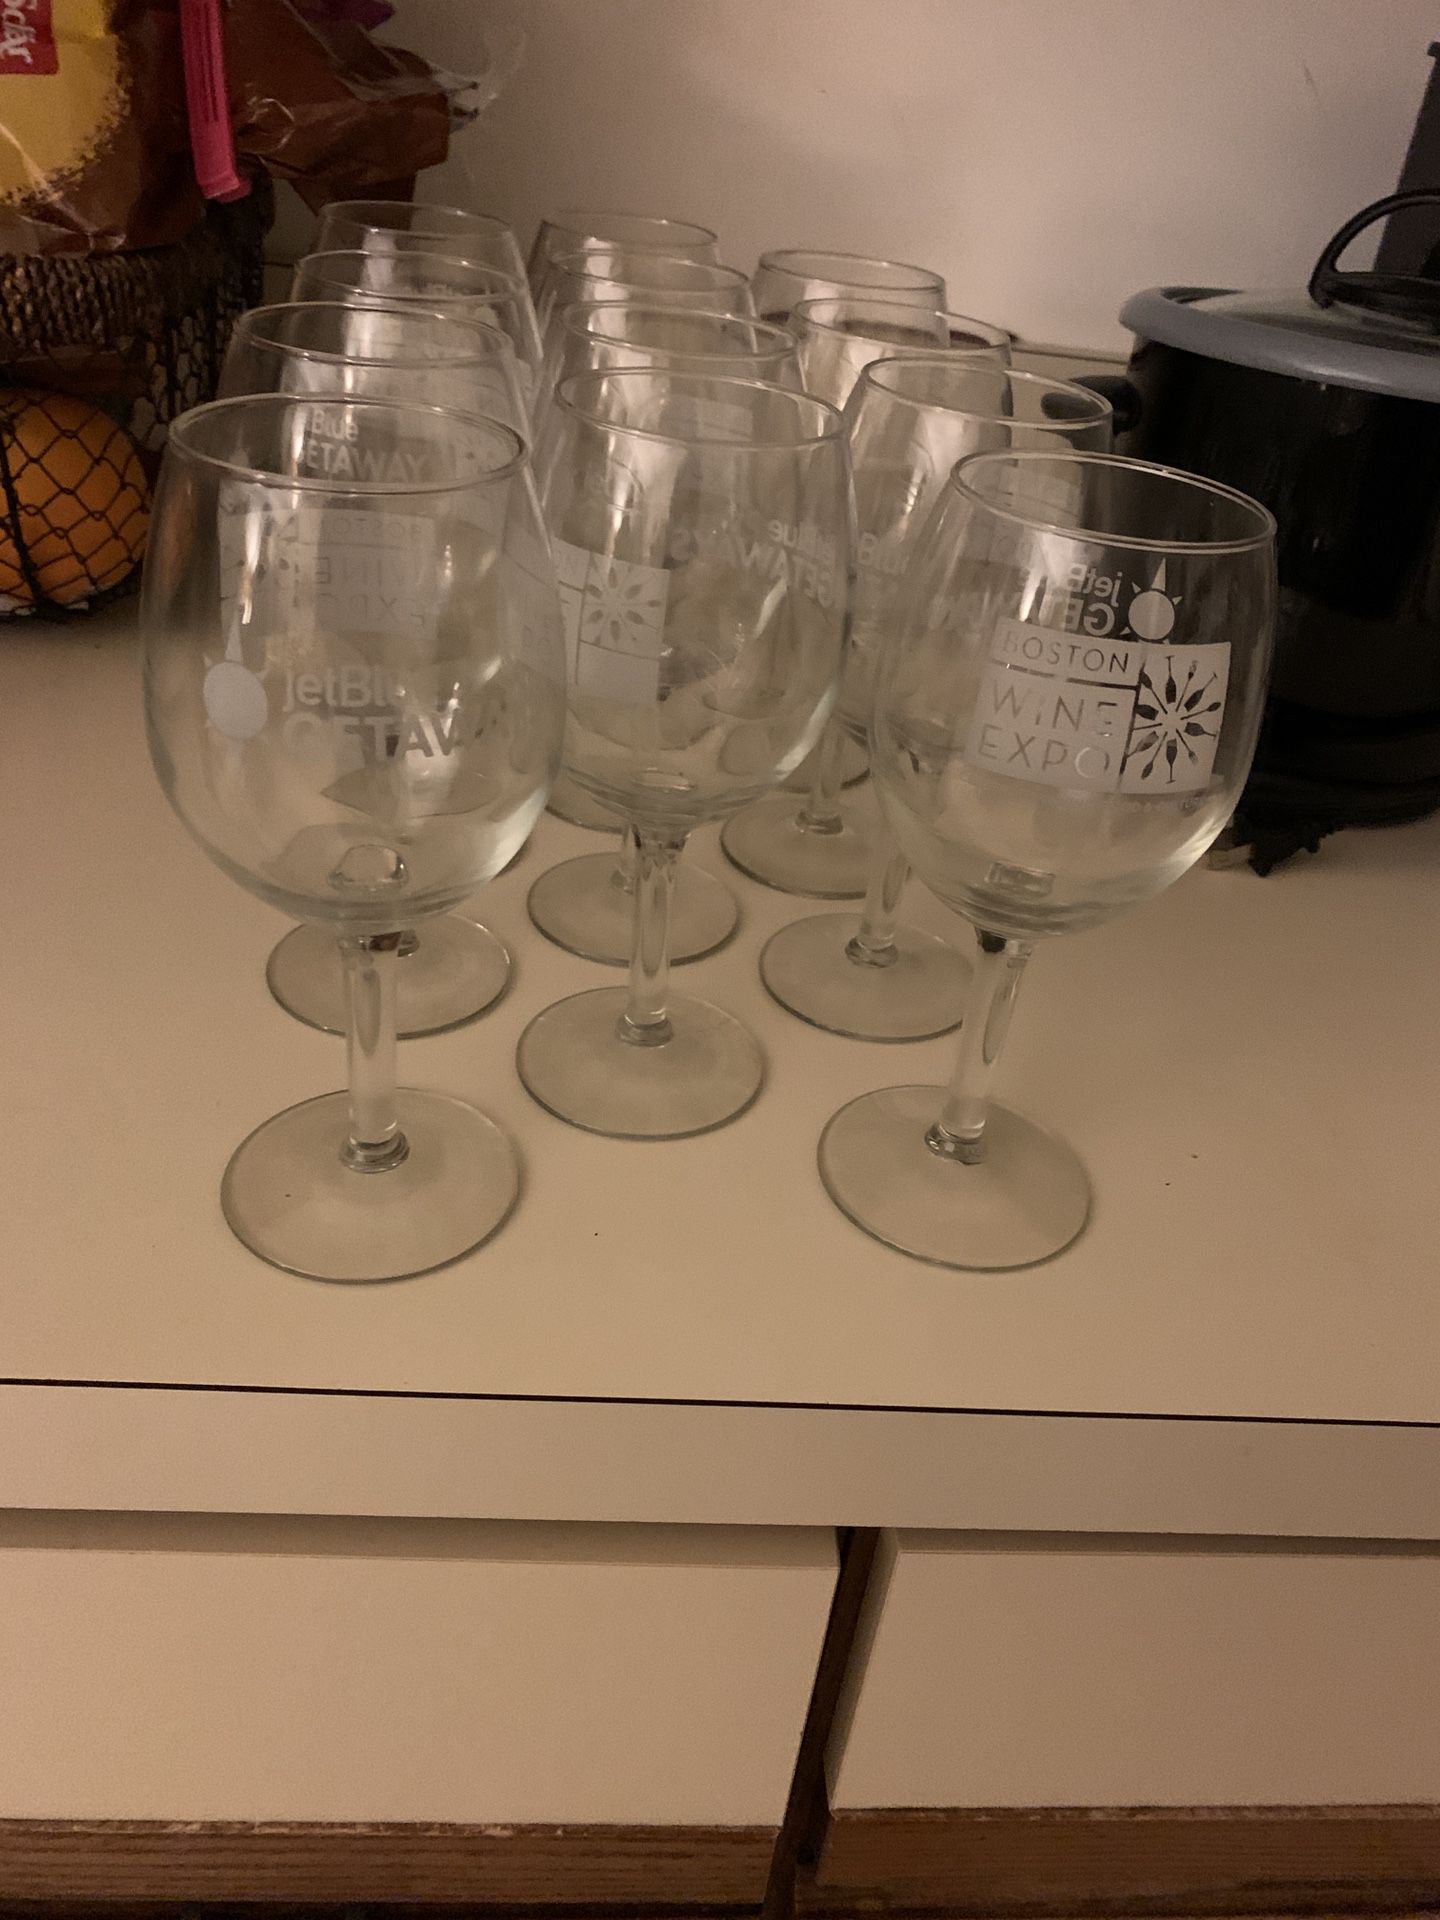 12 wine glasses from the Boston wine expo one side has a JetBlue logo